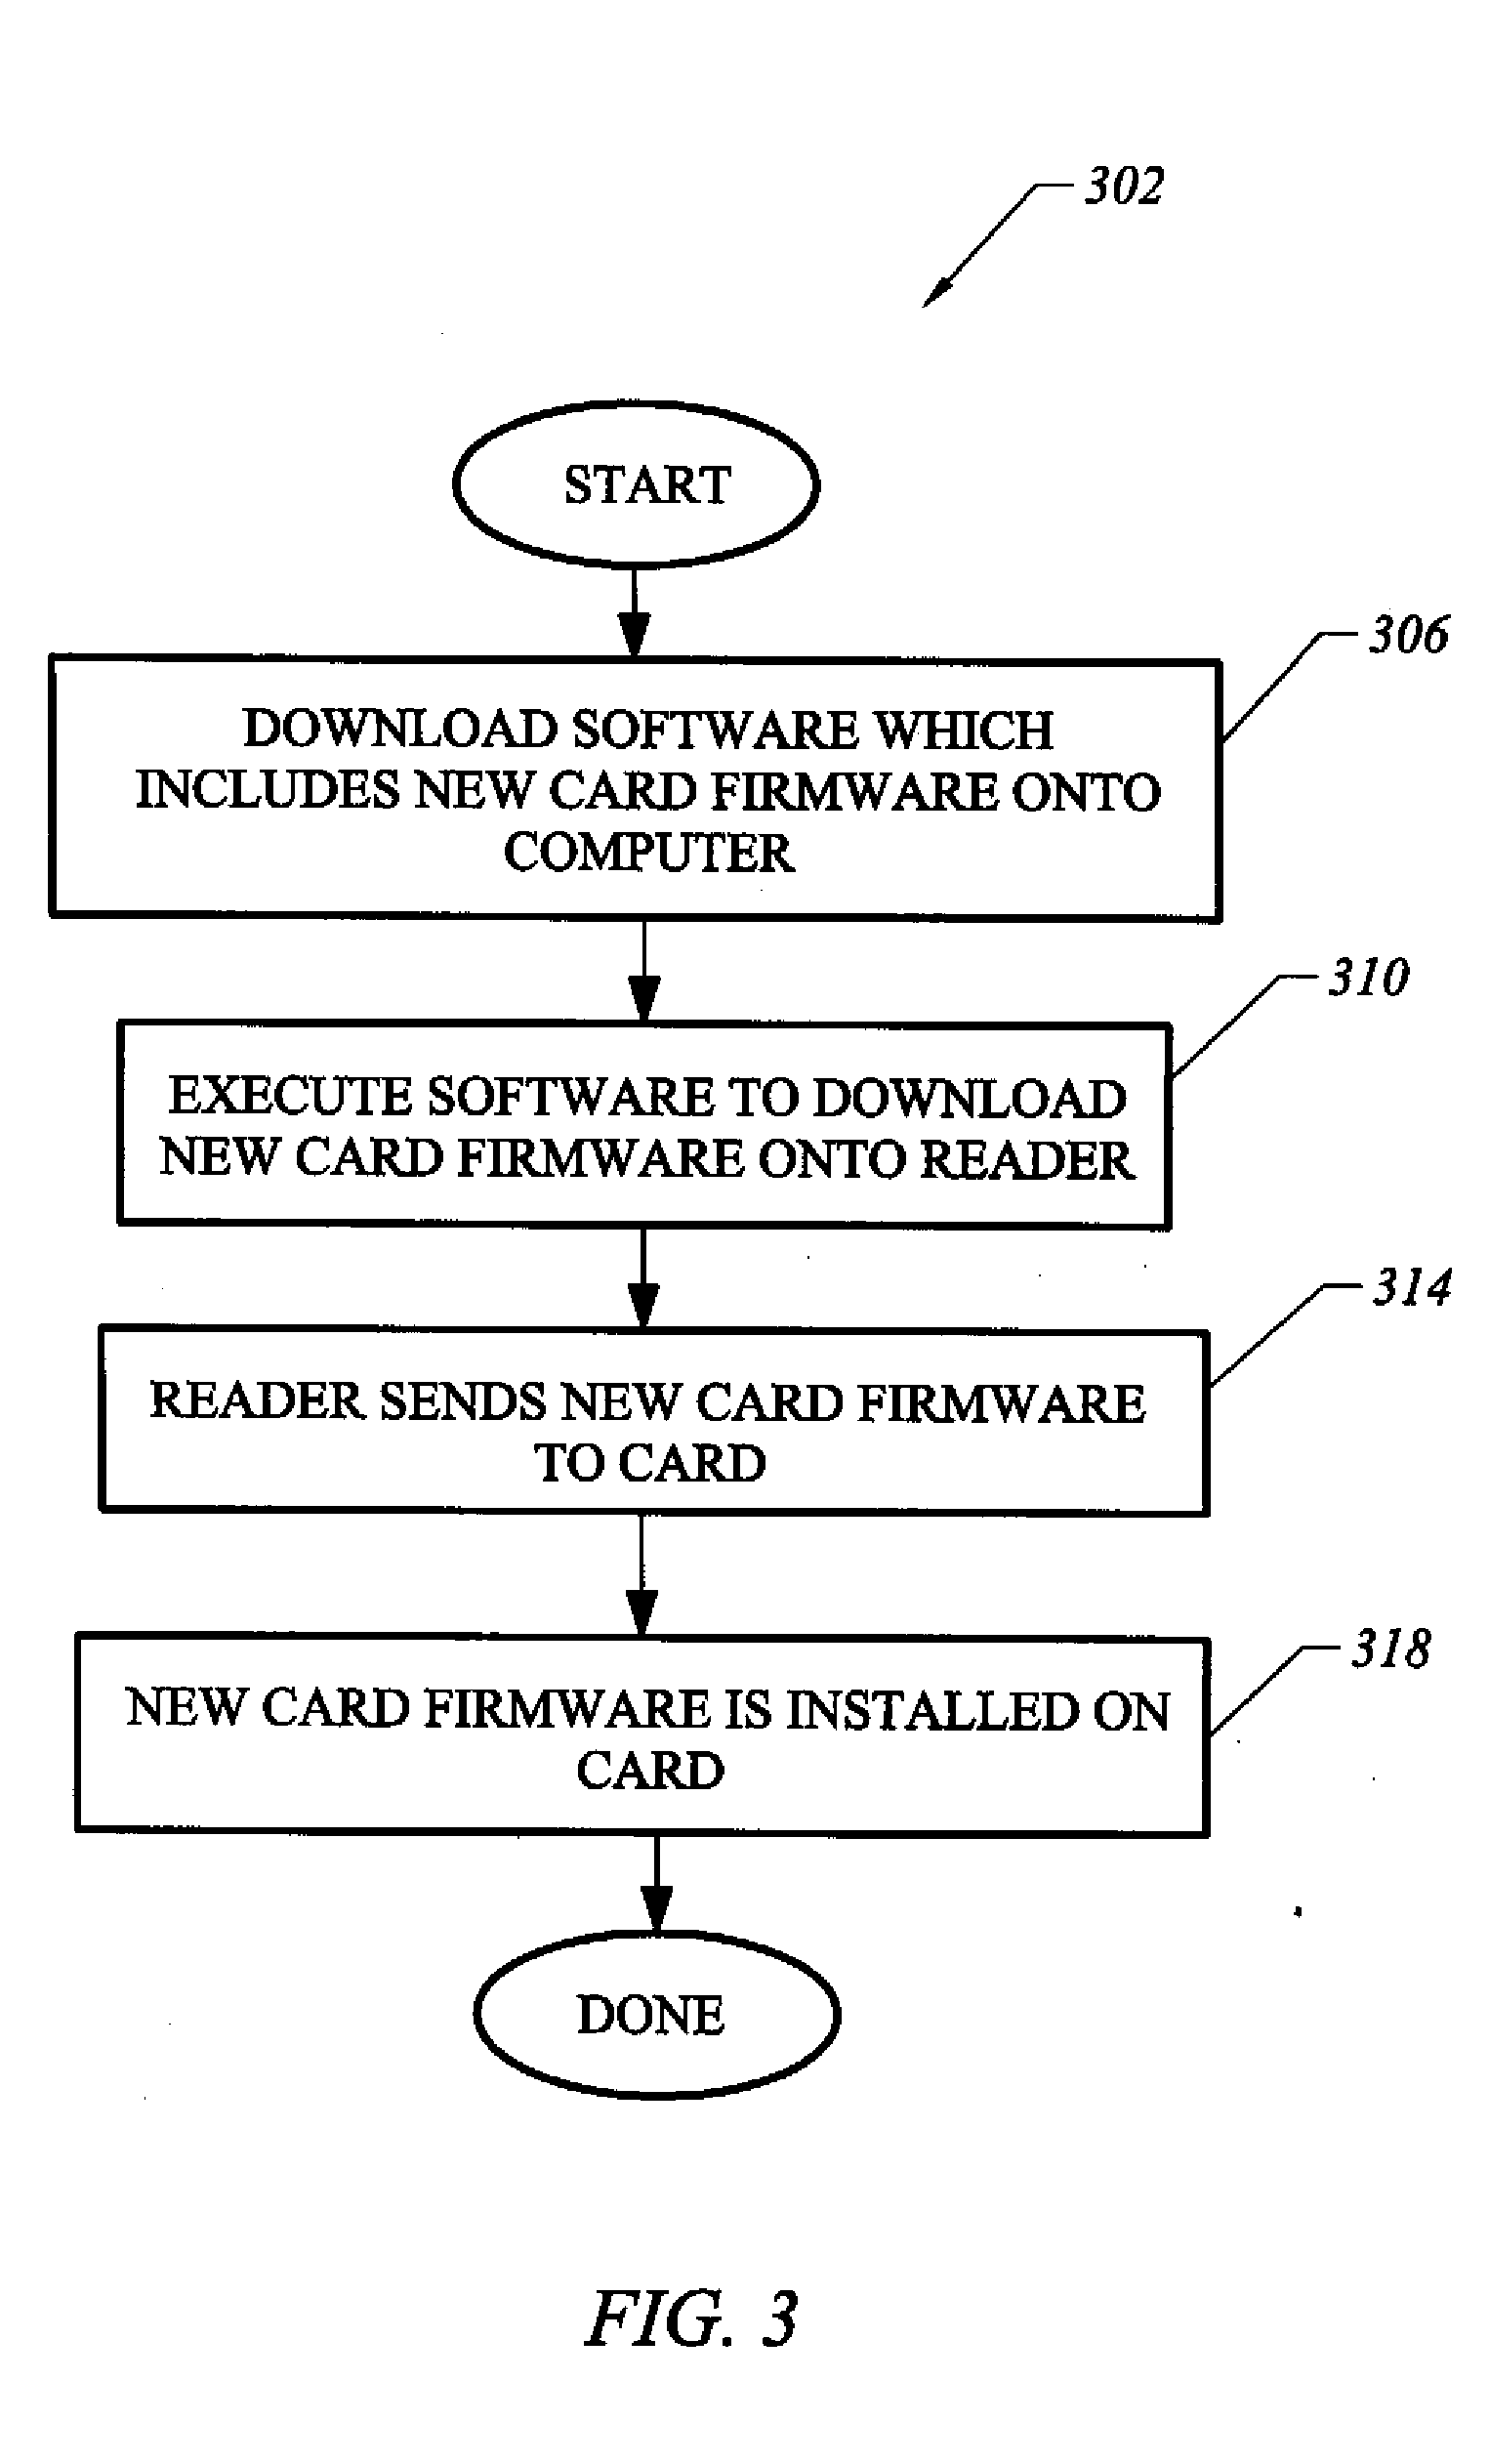 Implementation of In-System Programming to Update Firmware 0n Memory Cards